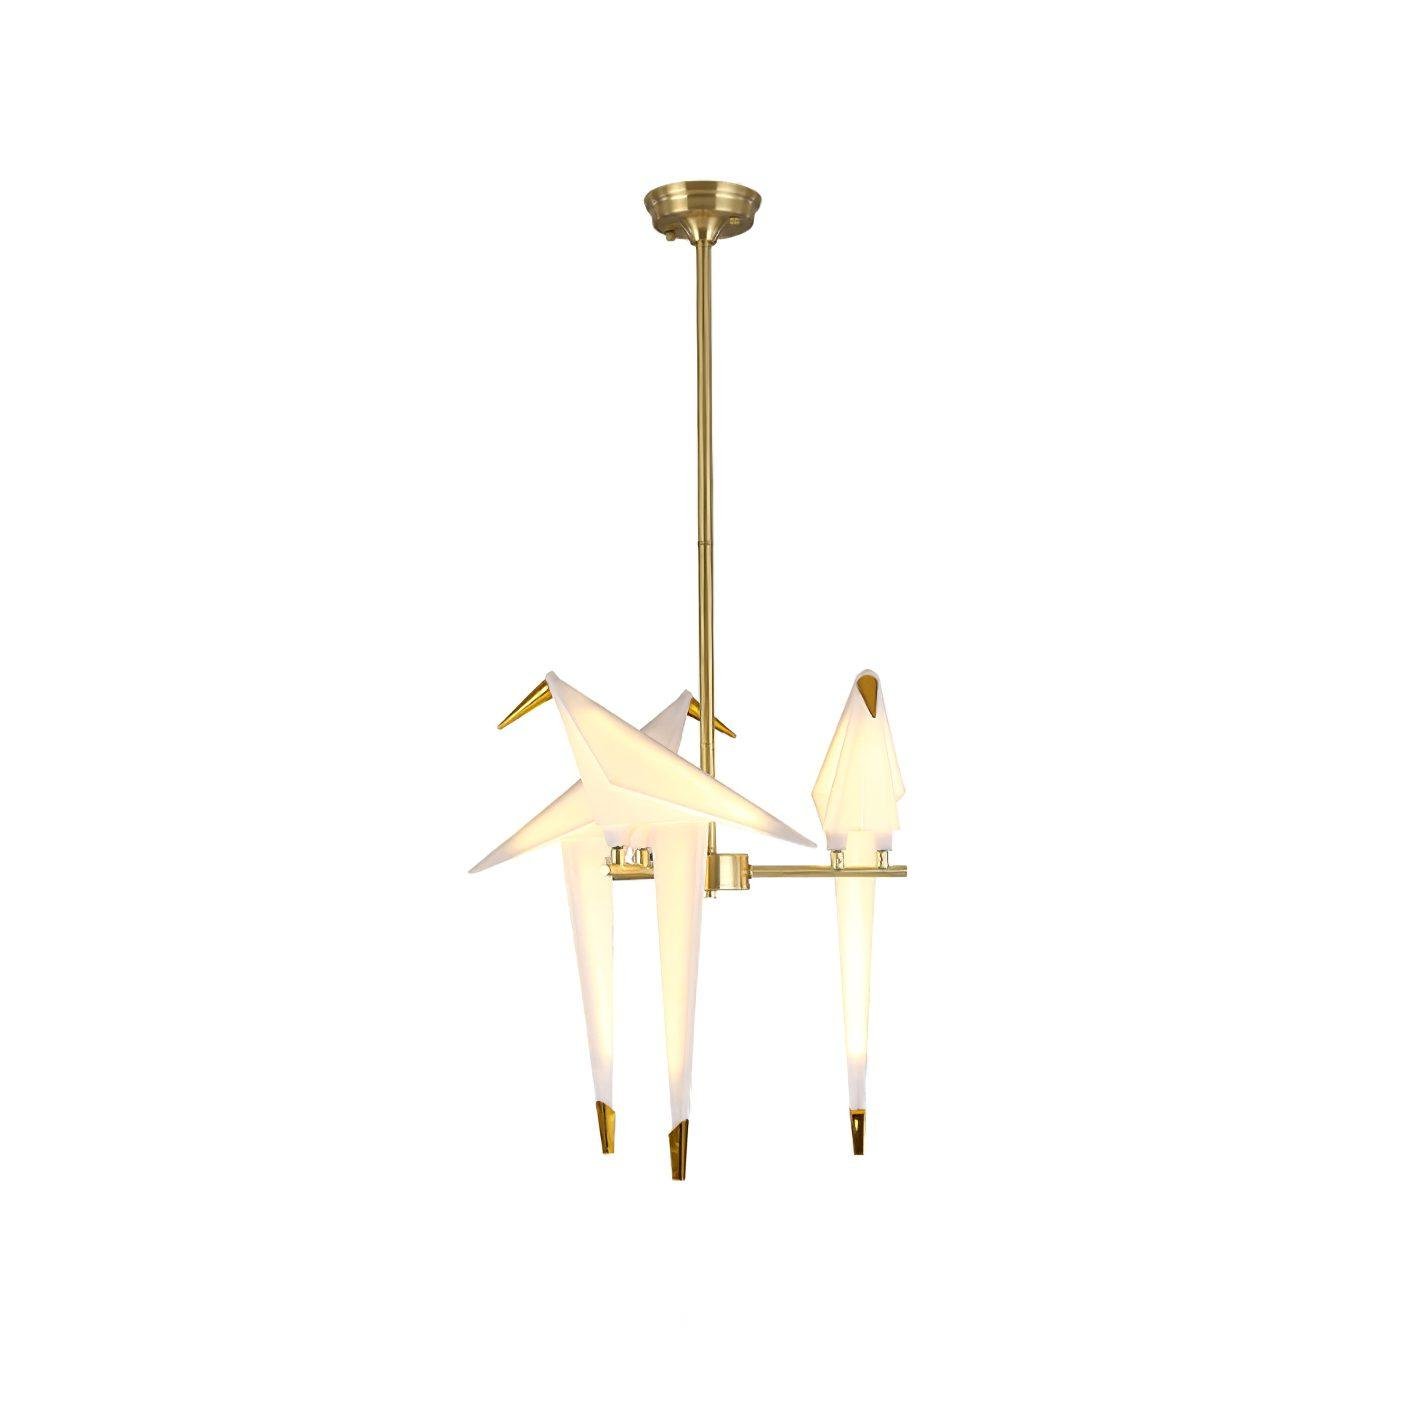 Chandelier with 3 Perching Bird Heads, Round Shape, 15.7" Diameter x 35.4" Height (40cm Dia x 90cm H), Gold and White Finish, Cold White Lighting